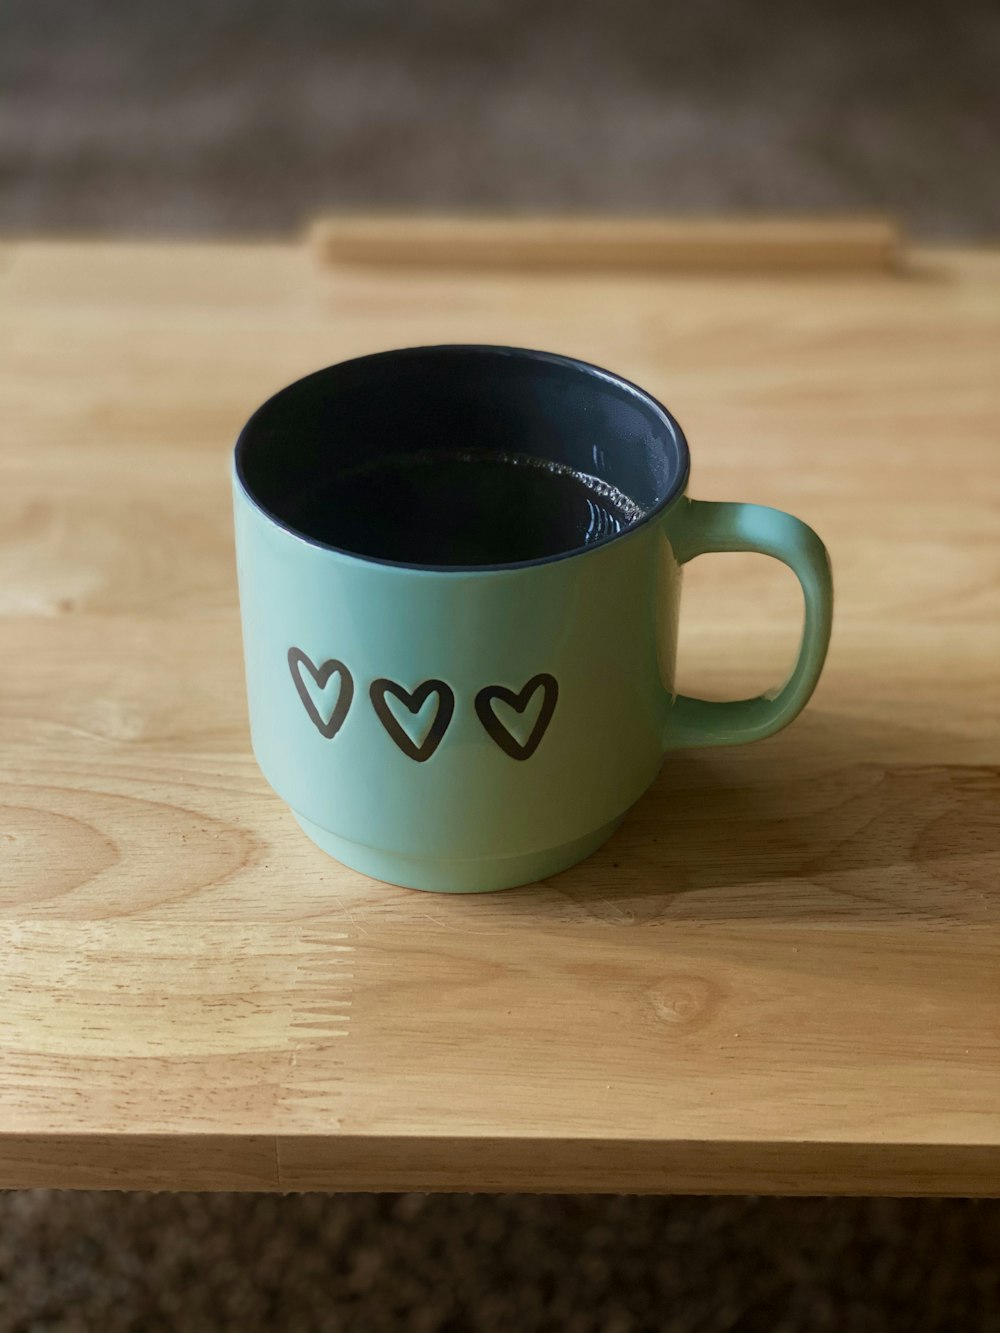 white and green ceramic mug on brown wooden table